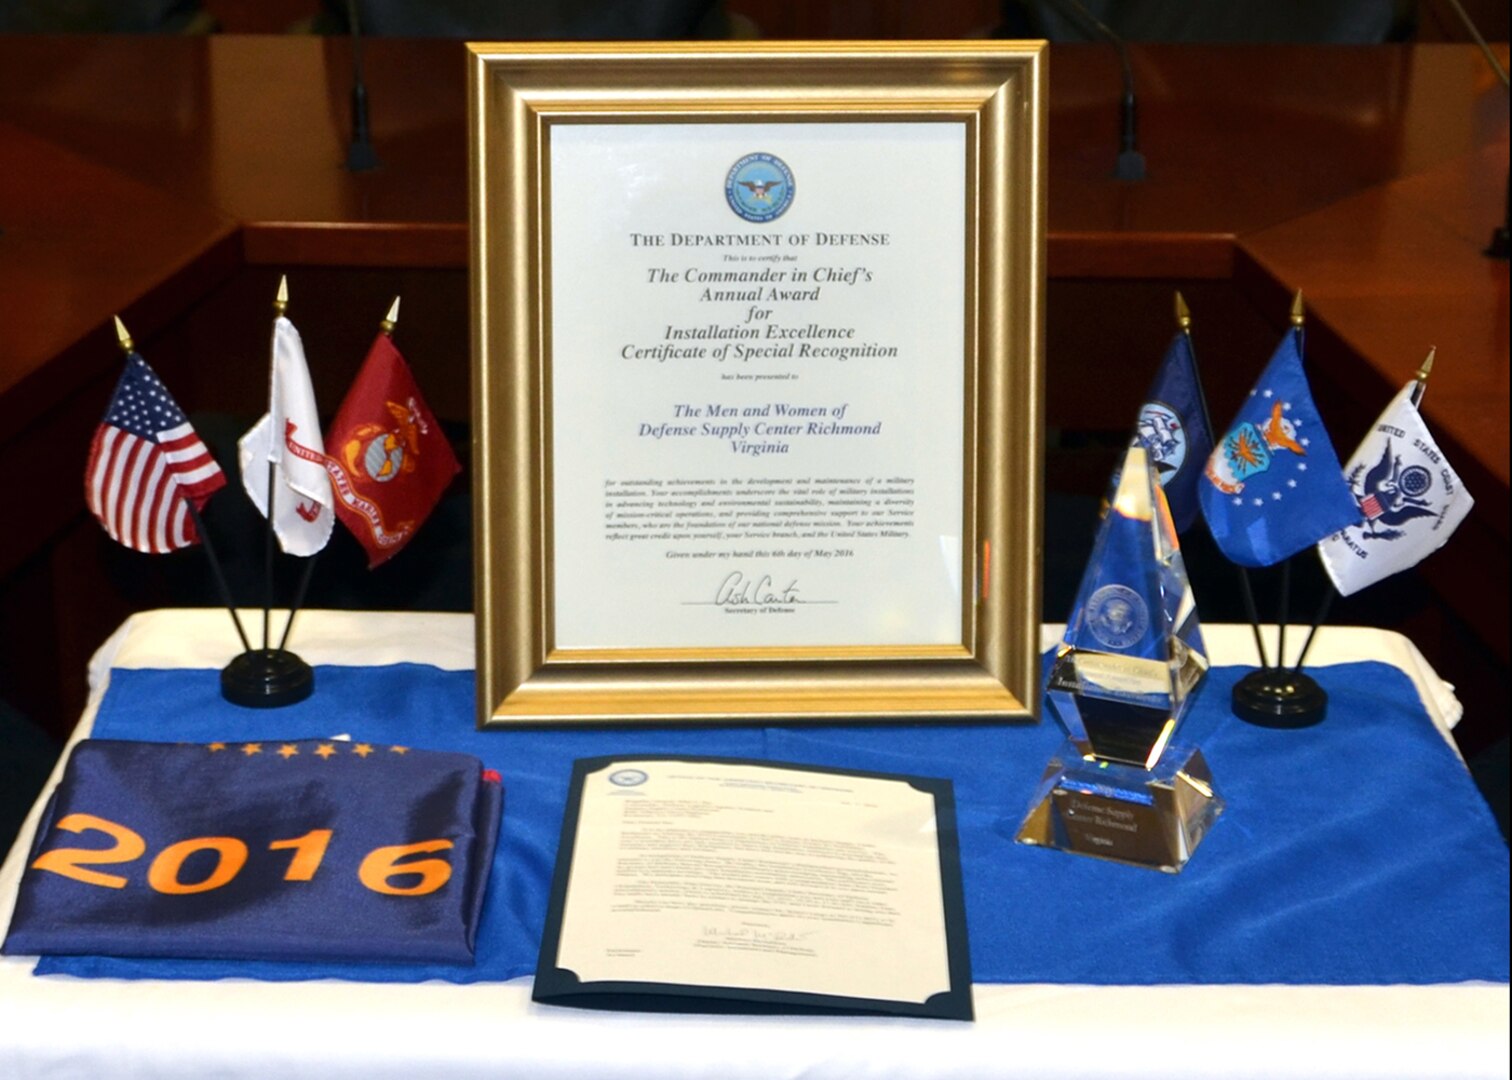 Following a July 15, 2016 video telecast ceremony, Defense Supply Center Richmond, Virginia, installation officials display awards received as a winner of the 2015 Commander in Chief's Annual Award for Installation Excellence. 